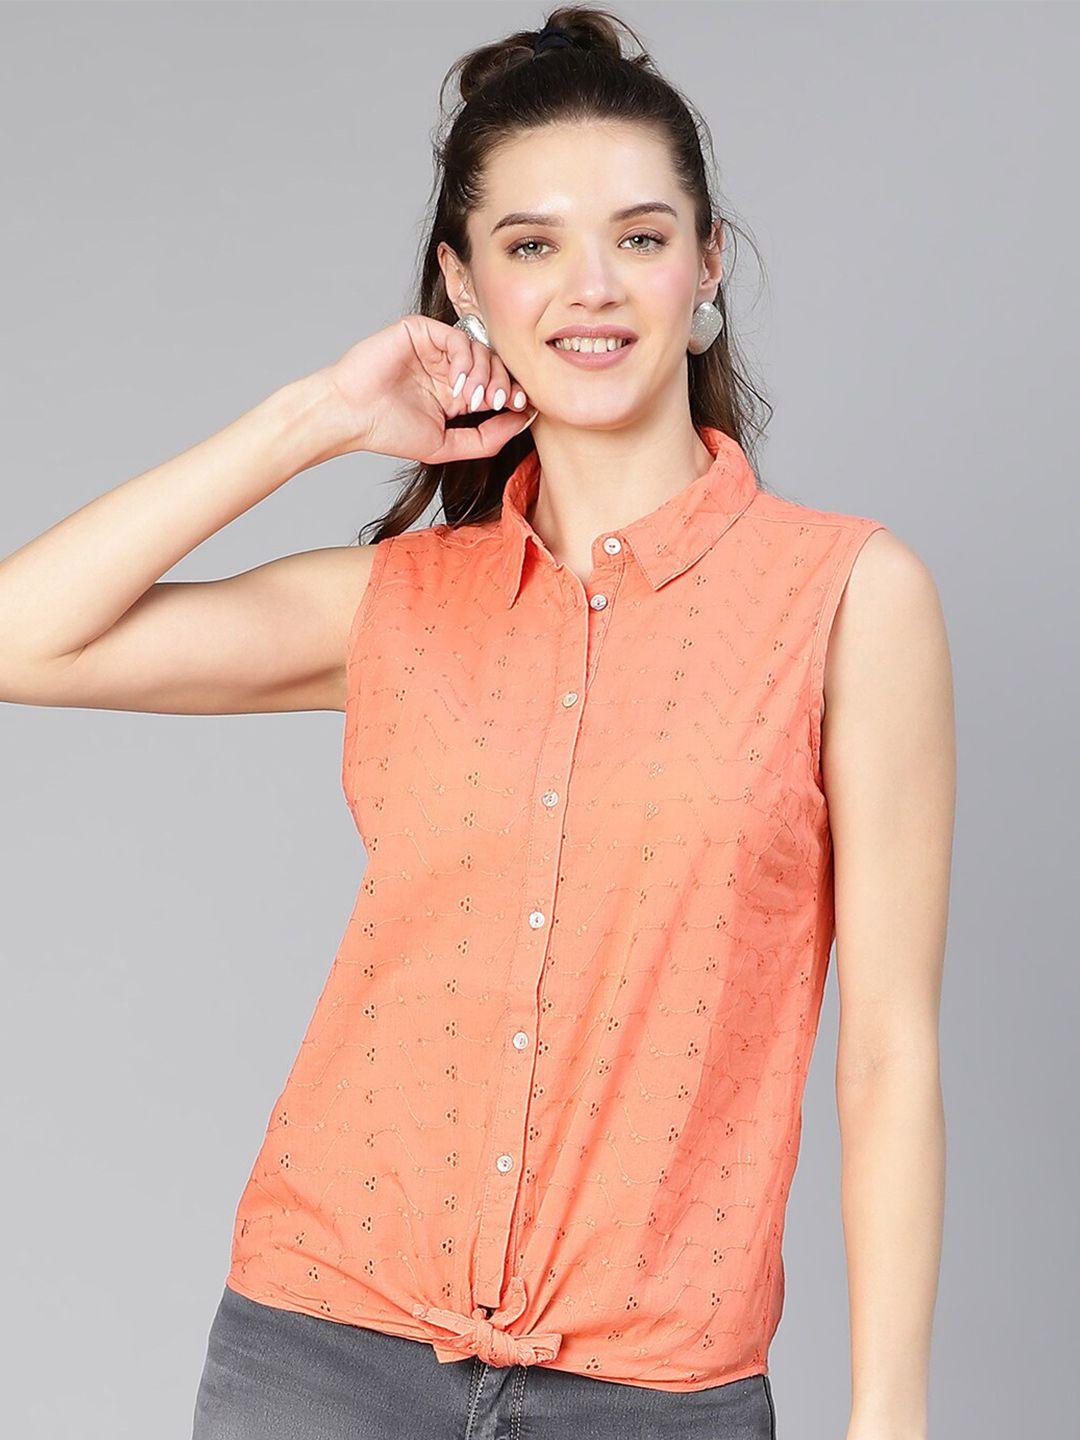 oxolloxo shirt collar schiffli tie-knotted cotton shirt style top